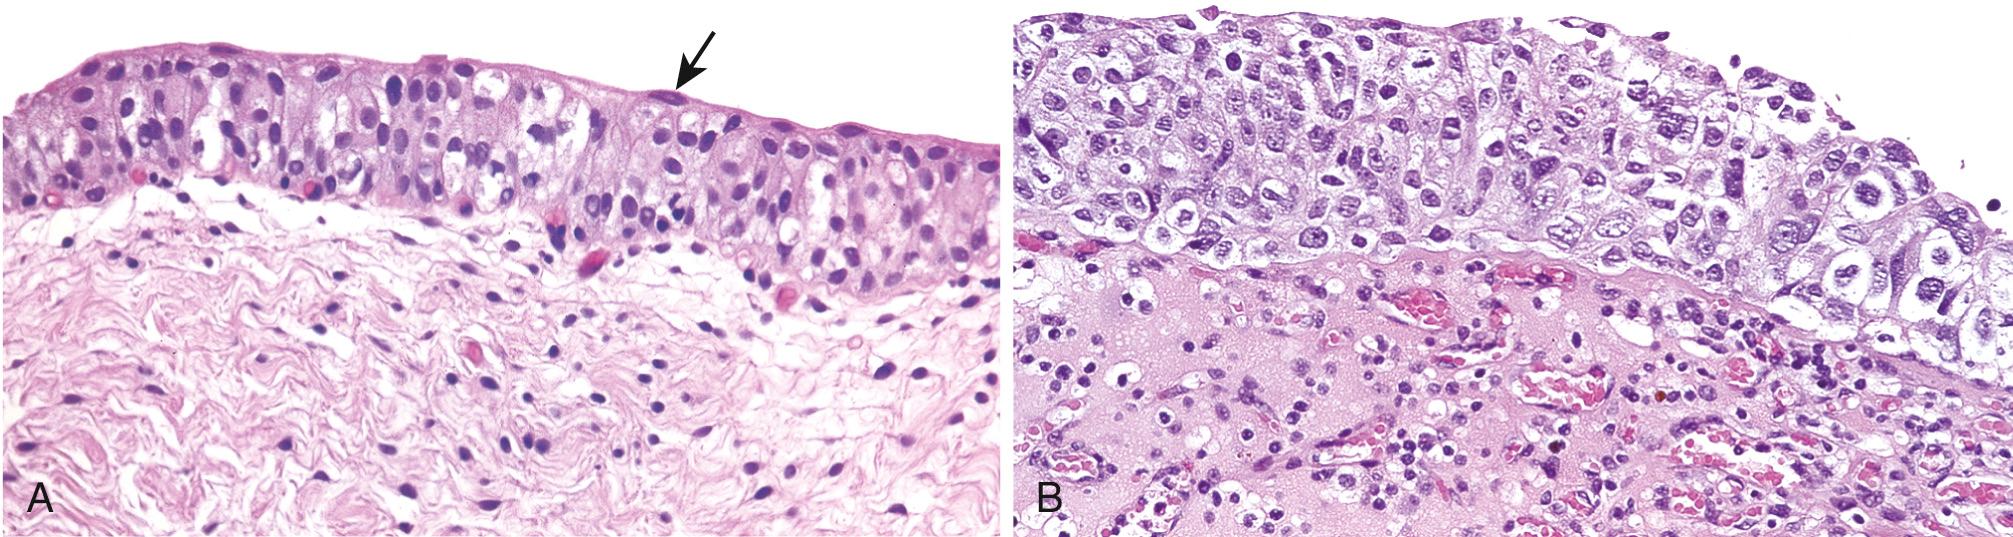 Figure 21.8, Bladder carcinoma in situ. (A) Normal urothelium with uniform nuclei and well-developed umbrella cell layer. (B) Carcinoma in situ showing a disorganized urothelium containing numerous cells having markedly enlarged and pleomorphic nuclei.